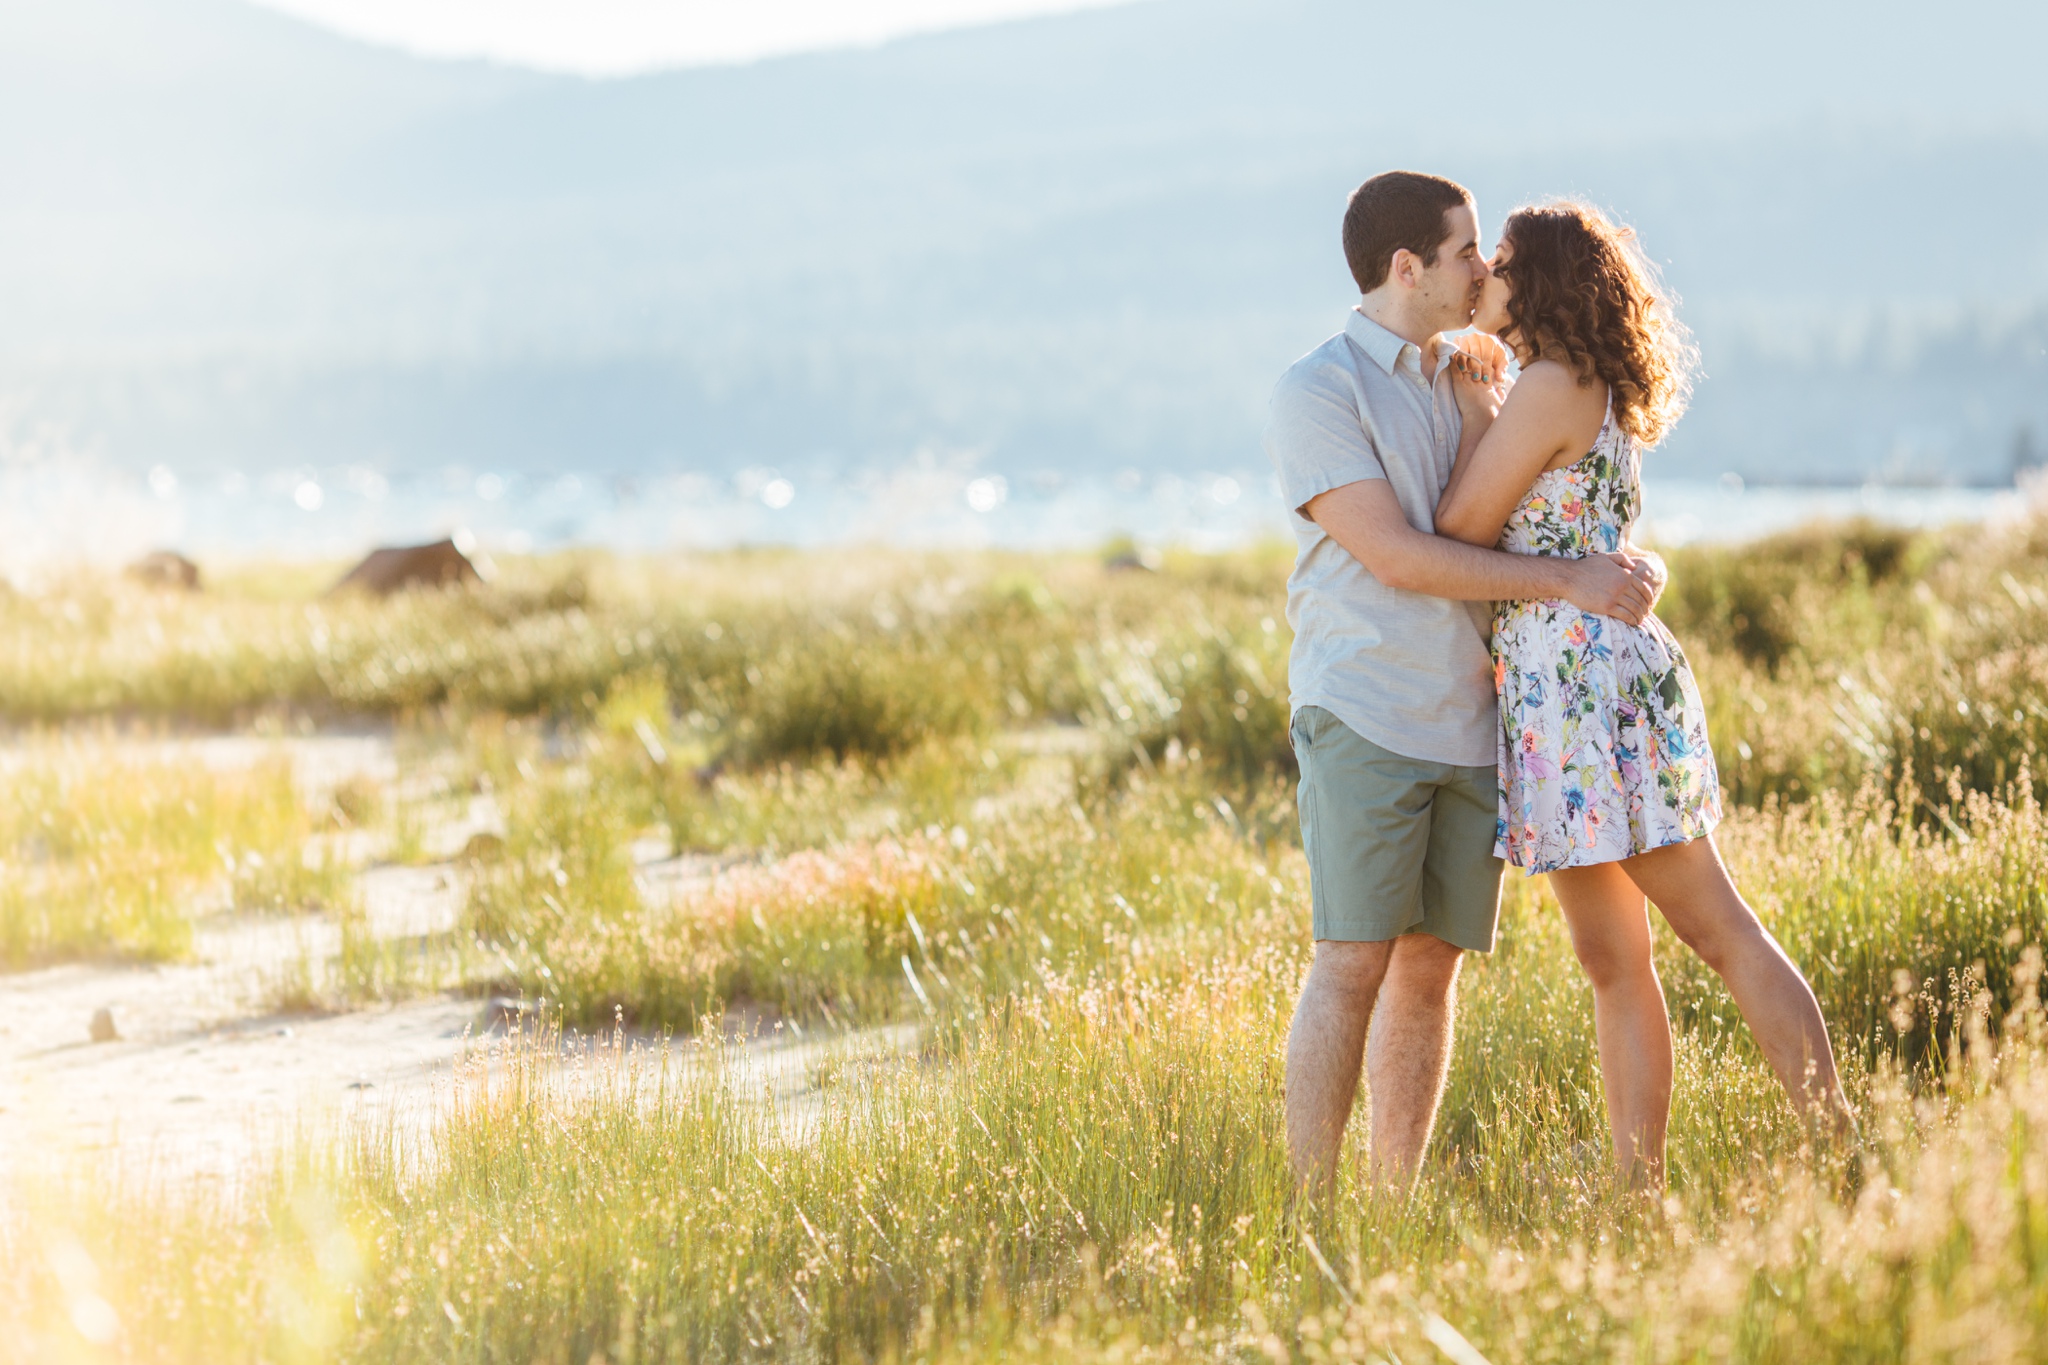 thedelauras_ostaraphotography_laketahoeengagement_laketahoeweddingphotograph_laketahoe_photographer_017